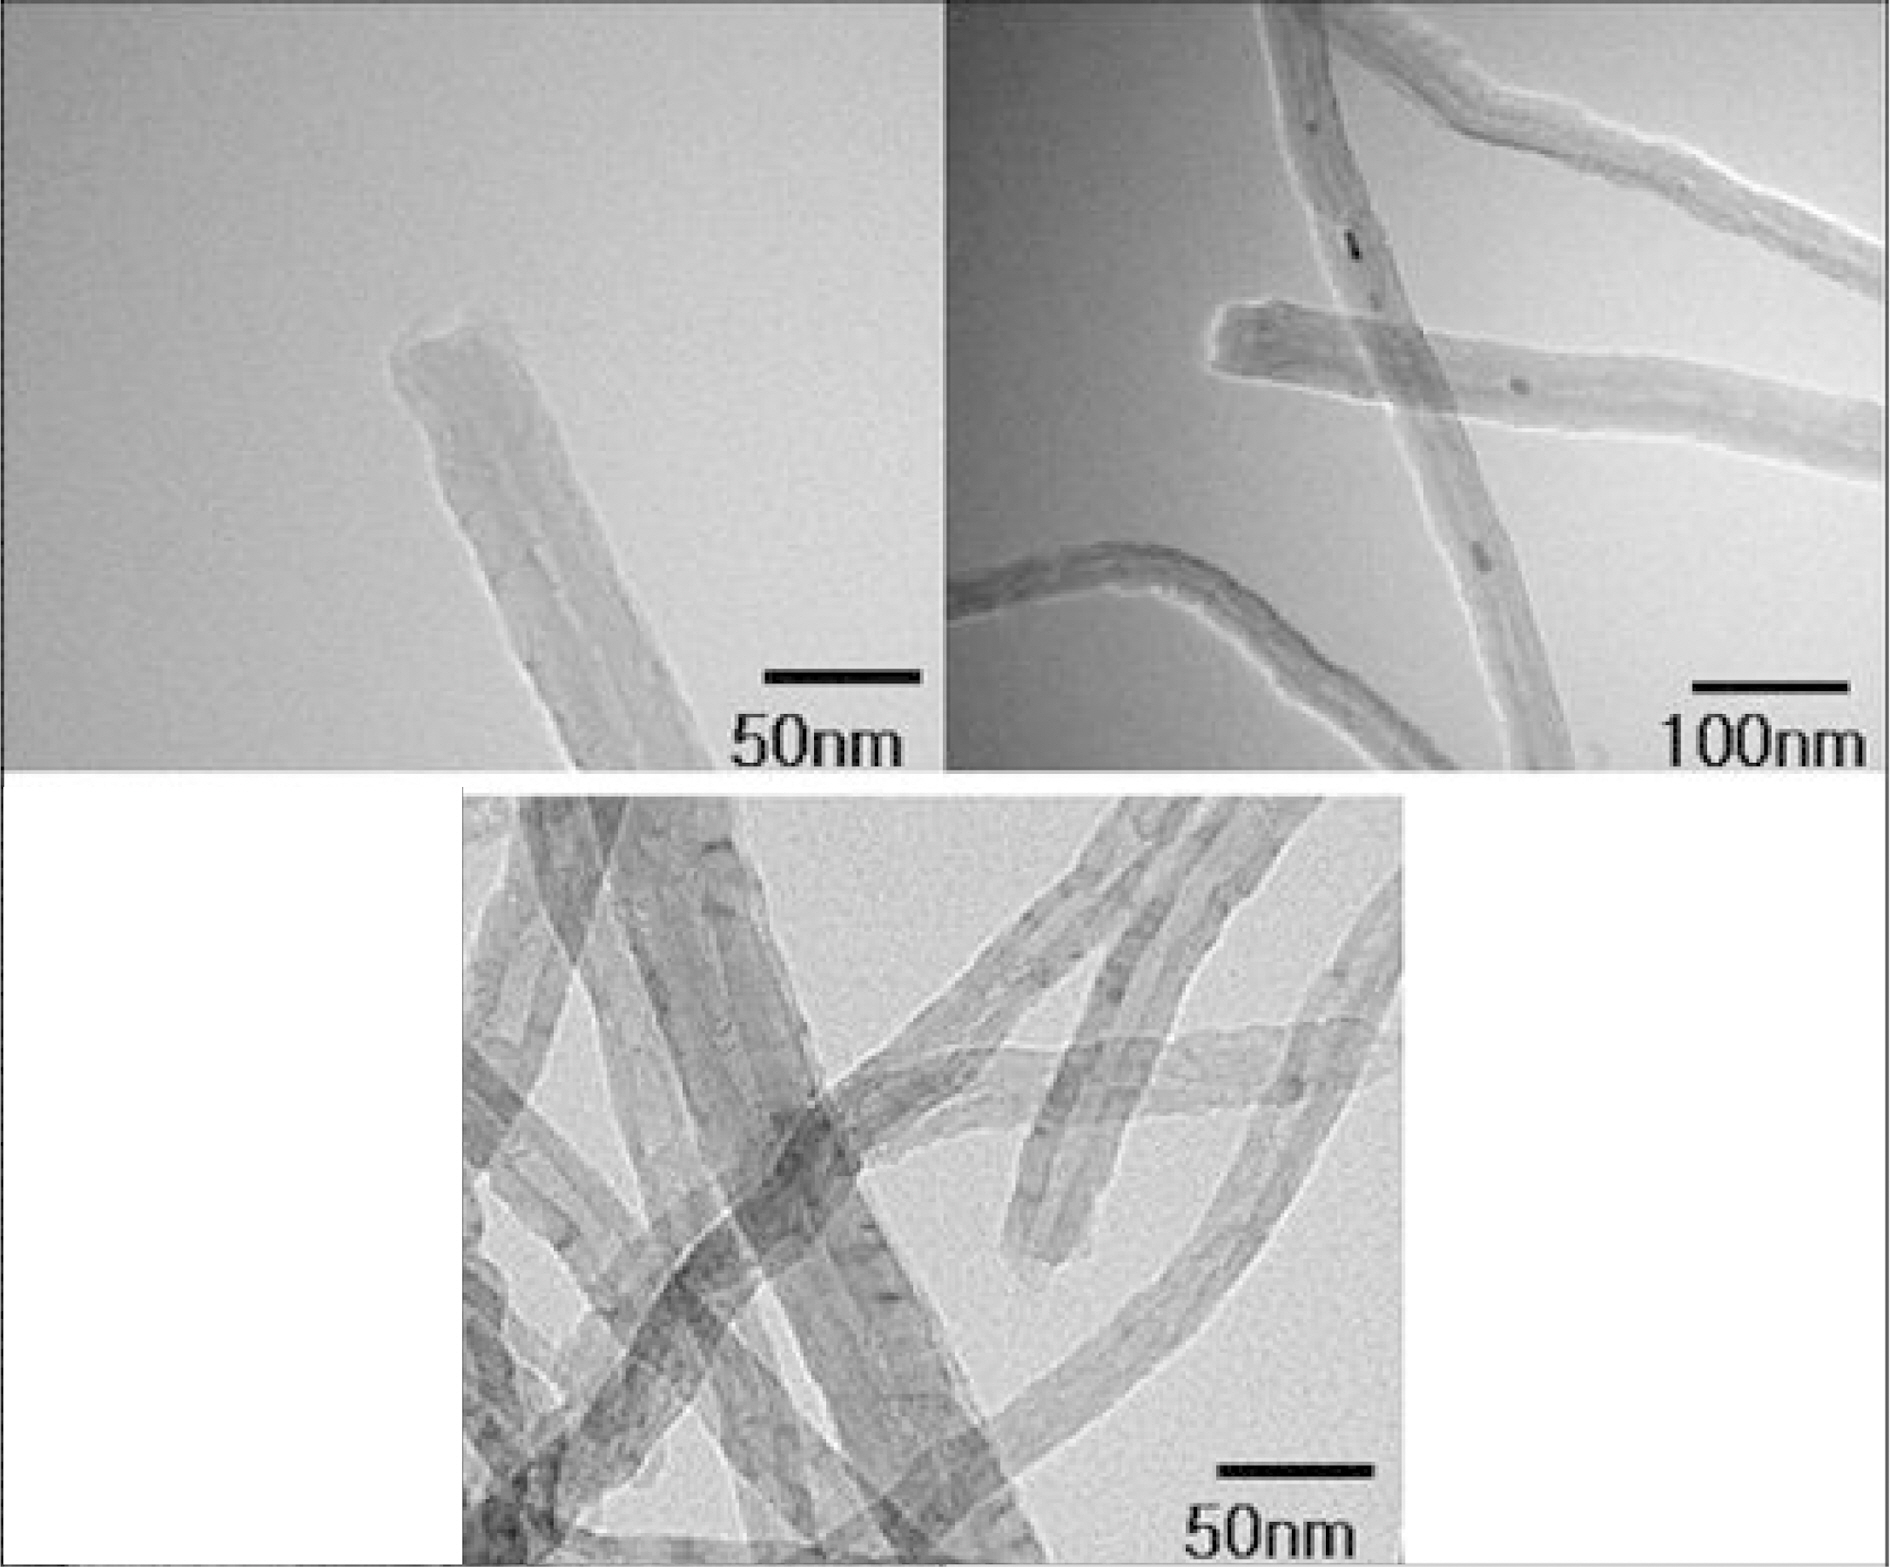 TEM images of carbon nanotubes grown by CVD with local heating method.